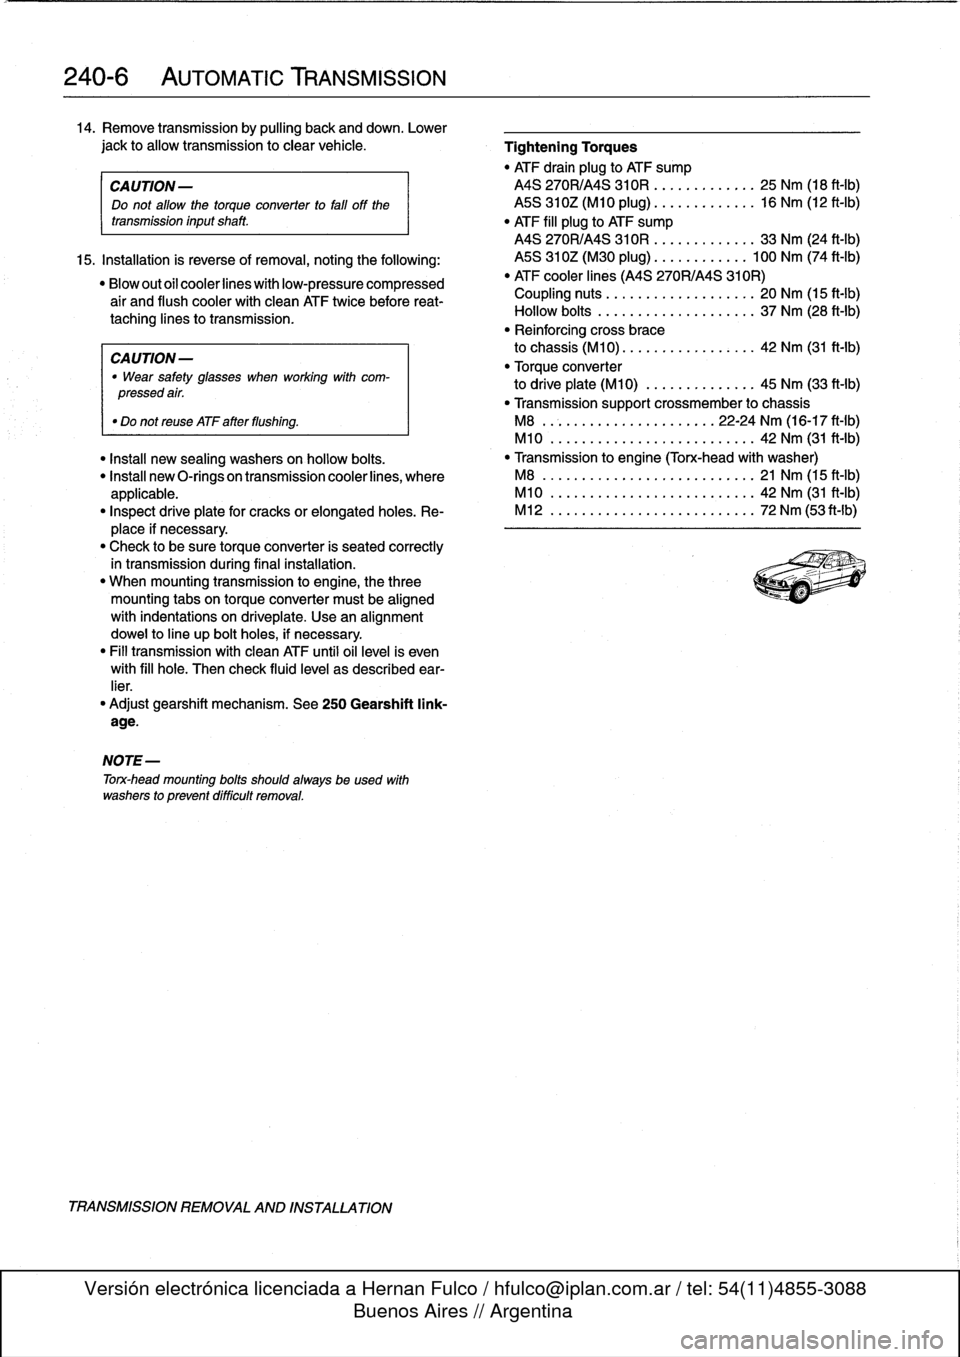 BMW 318i 1995 E36 Workshop Manual 
240-
6

	

AUTOMATIC
TRANSMISSION

14
.
Remove
transmission
by
pulling
back
and
down
.
Lower

jack
to
allow
transmission
to
clear
vehicle
.

	

Tightening
Torques

"
ATF
drain
plug
to
ATF
sump

CA
UT